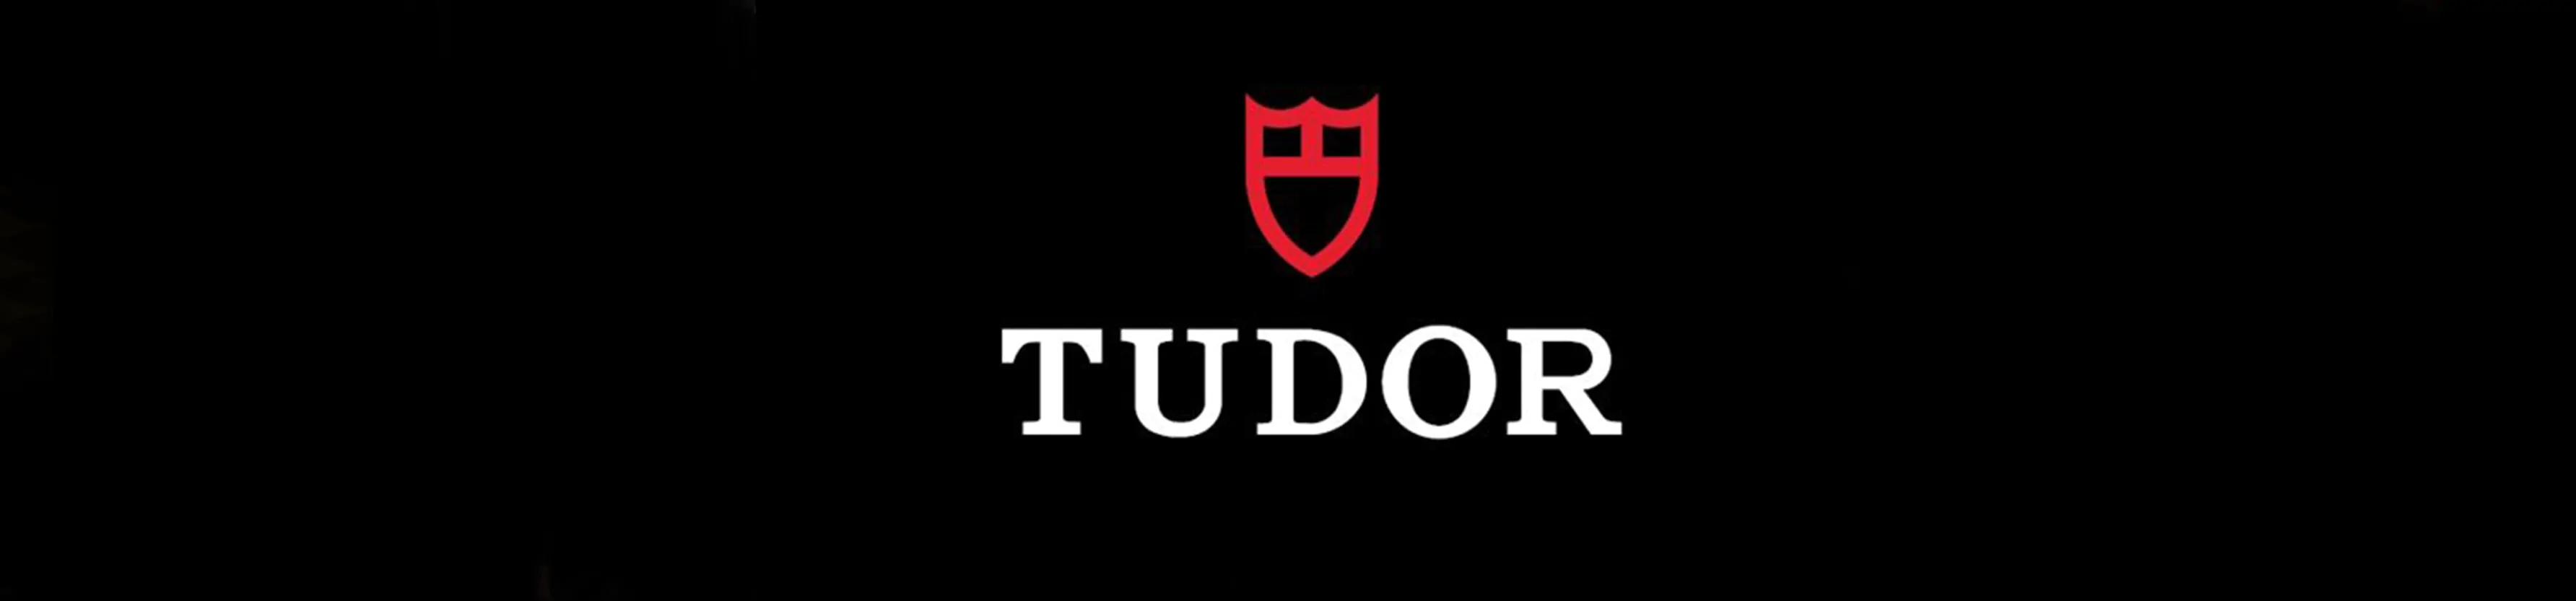 TUDOR Now Available to Purchase Online